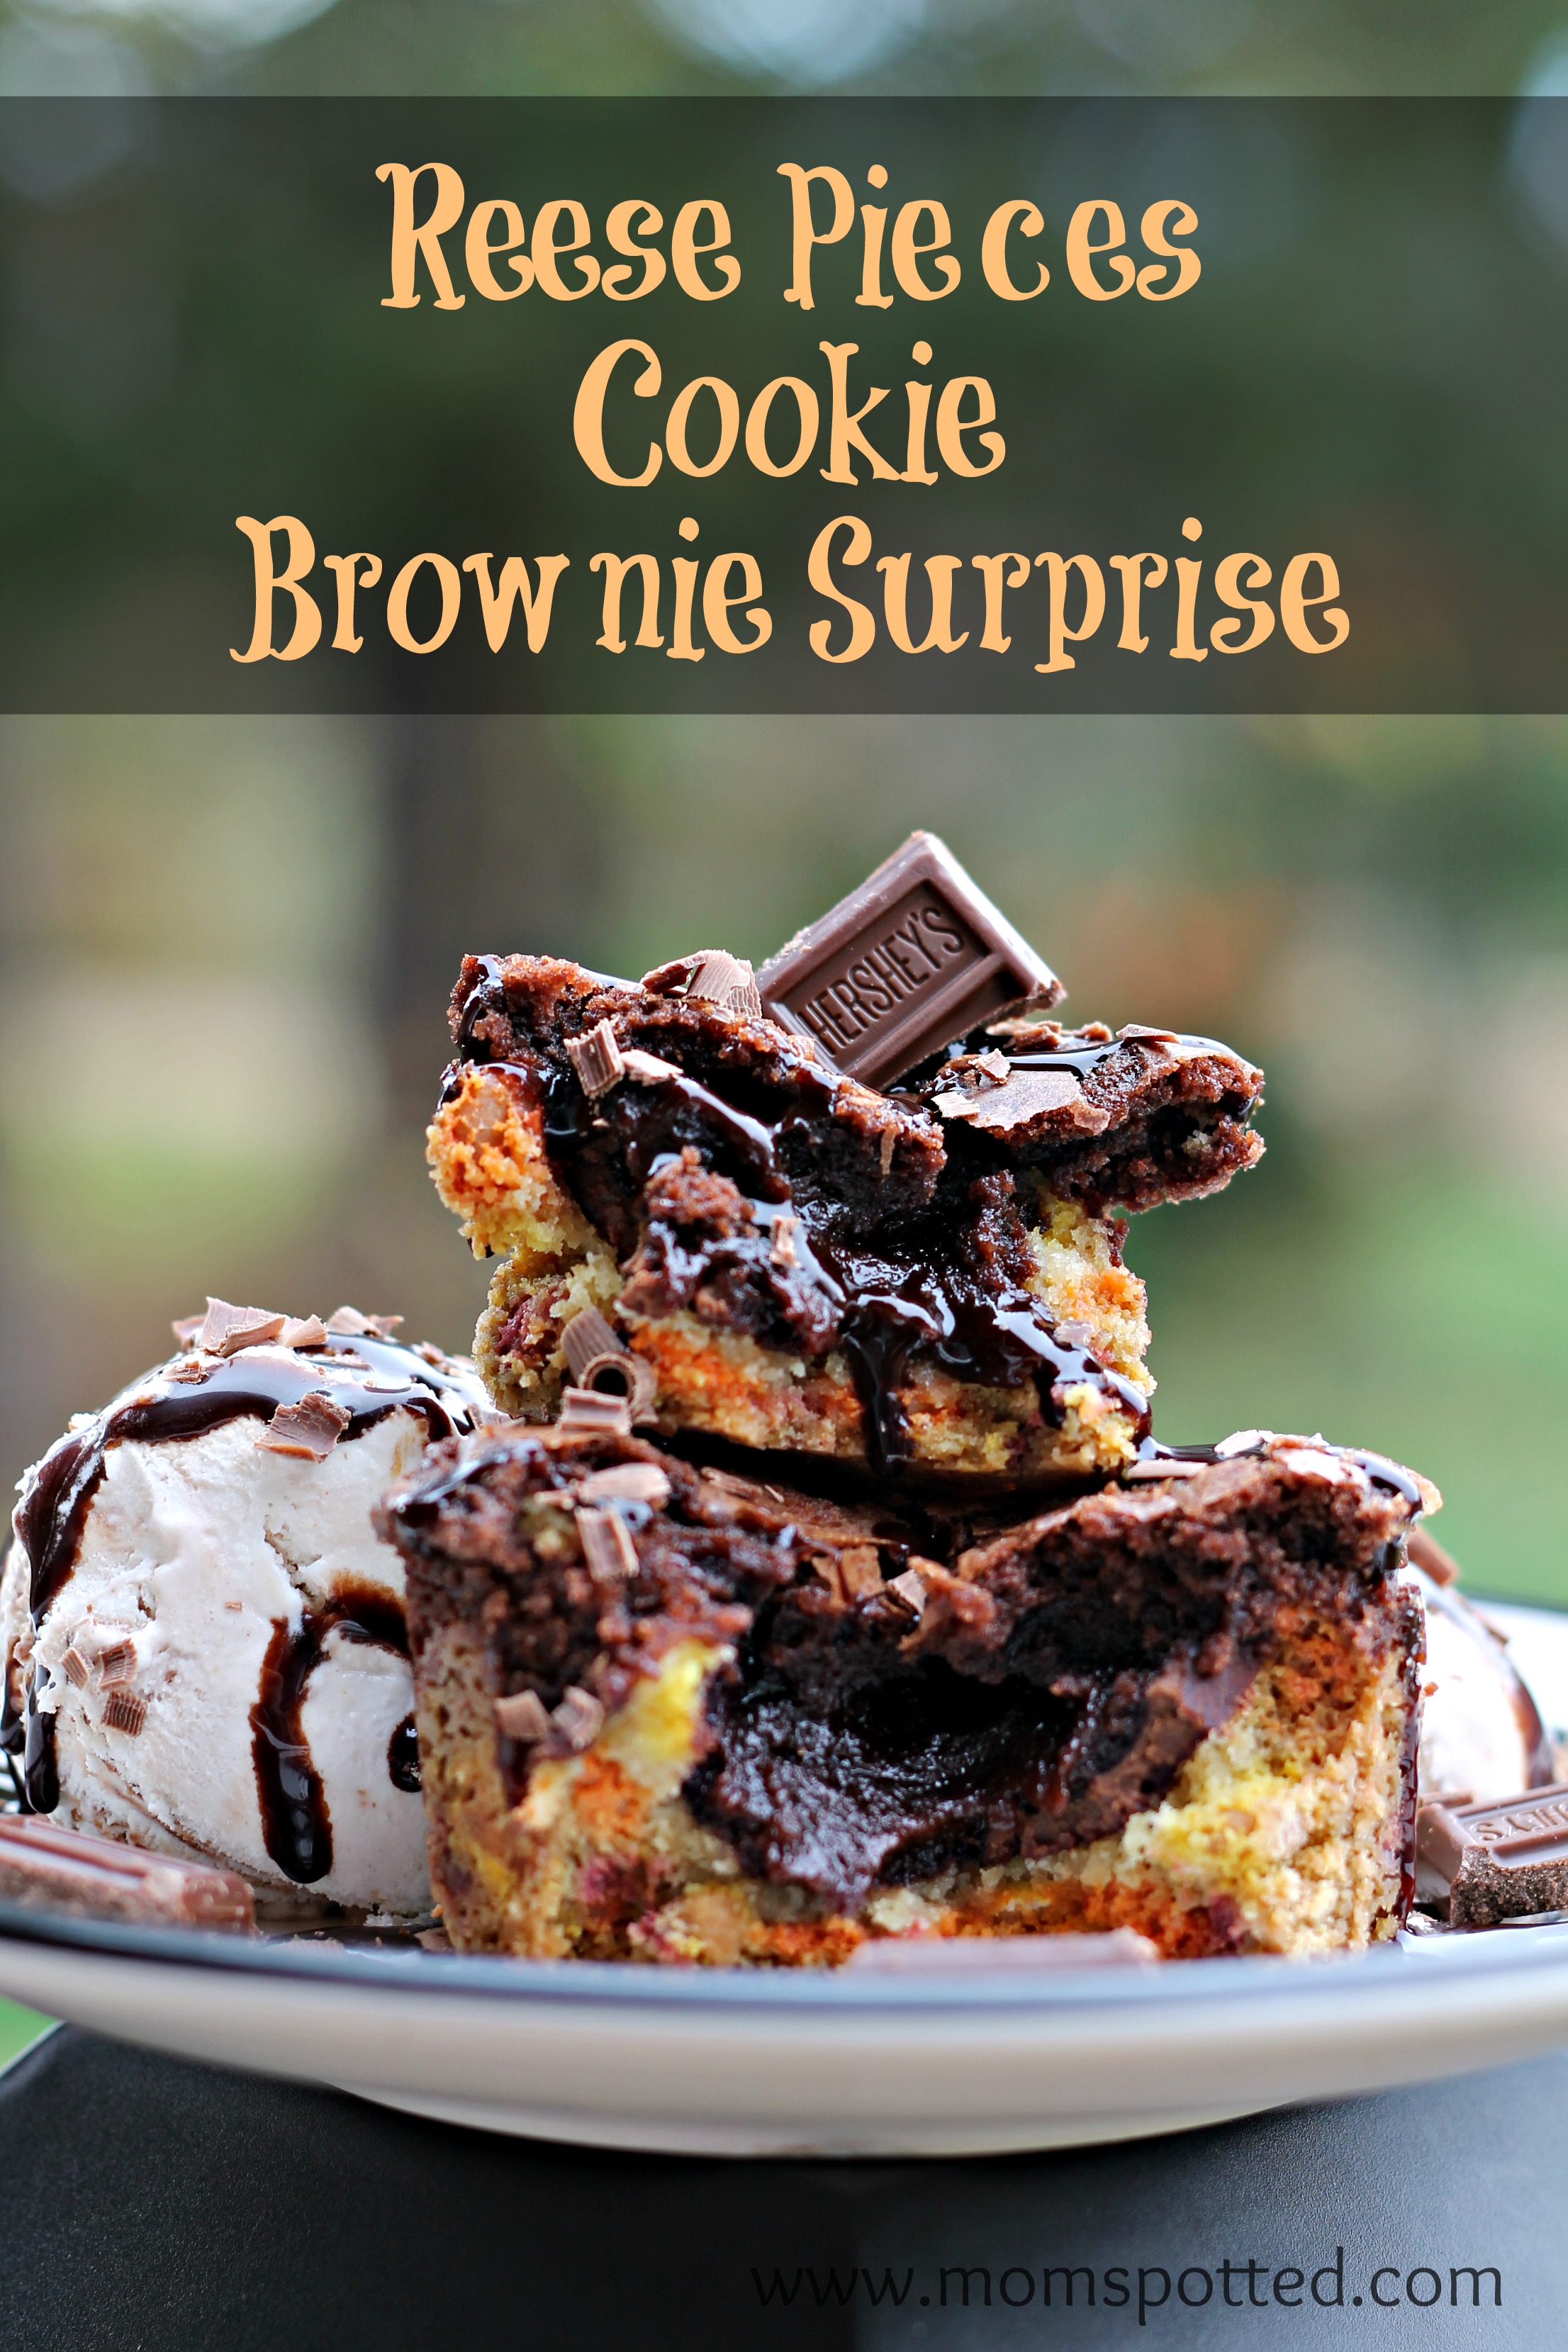 Got Candy? Make our Reese's Pieces Cookie Brownie Surprise Recipe! #HersheysHalloween #momspotted